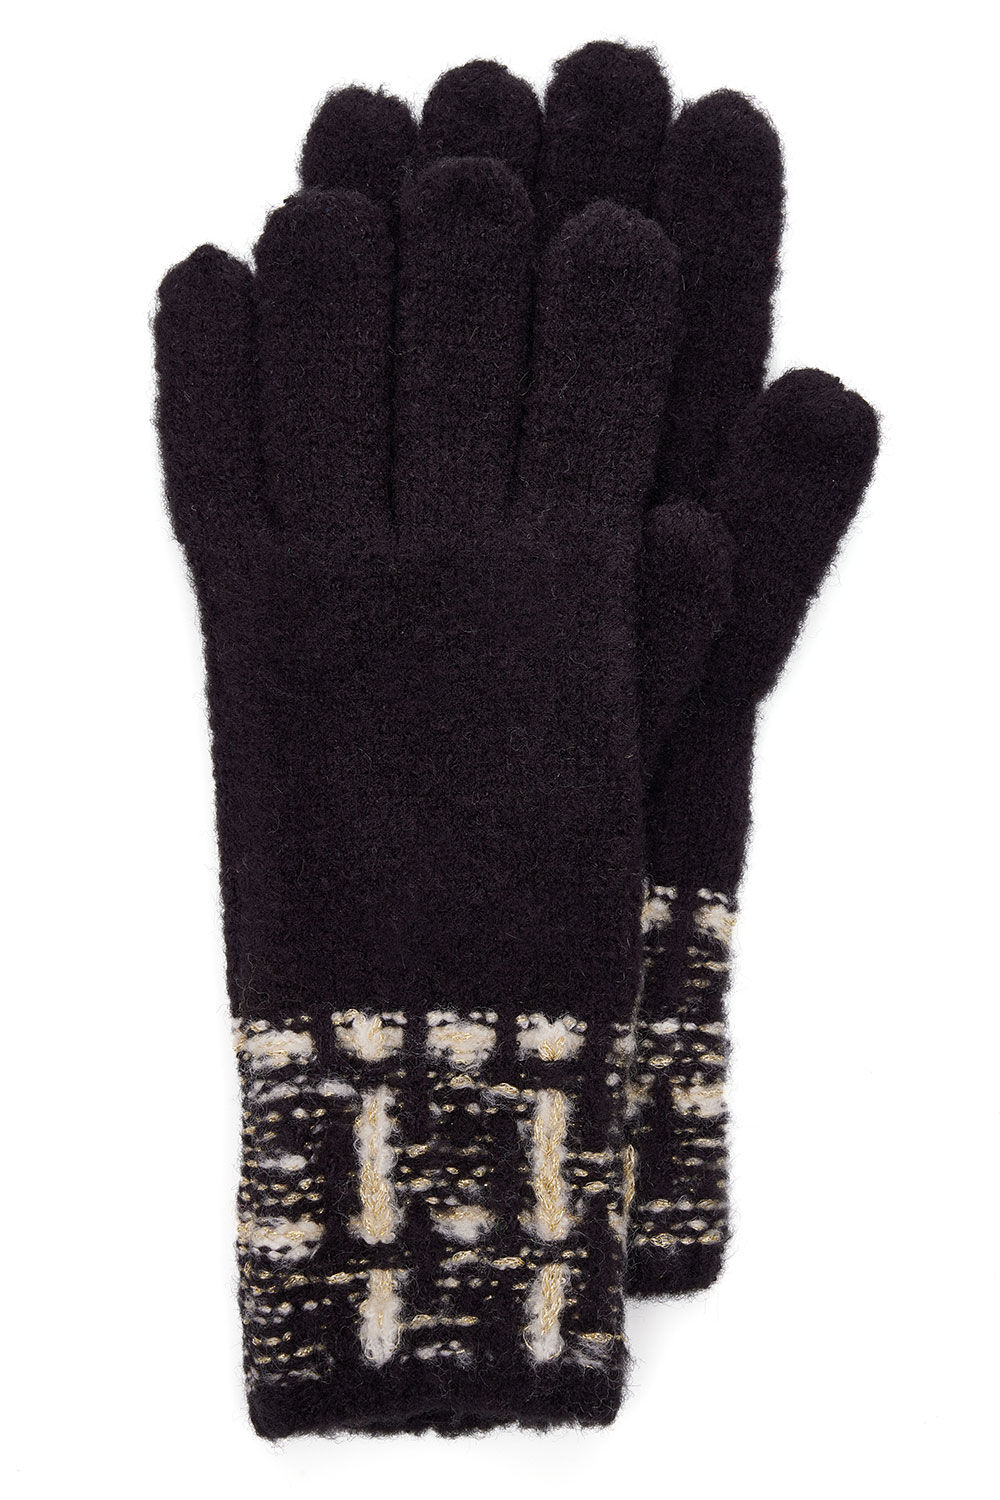 Bonmarche Black and Gold Lurex Check Knitted Gloves